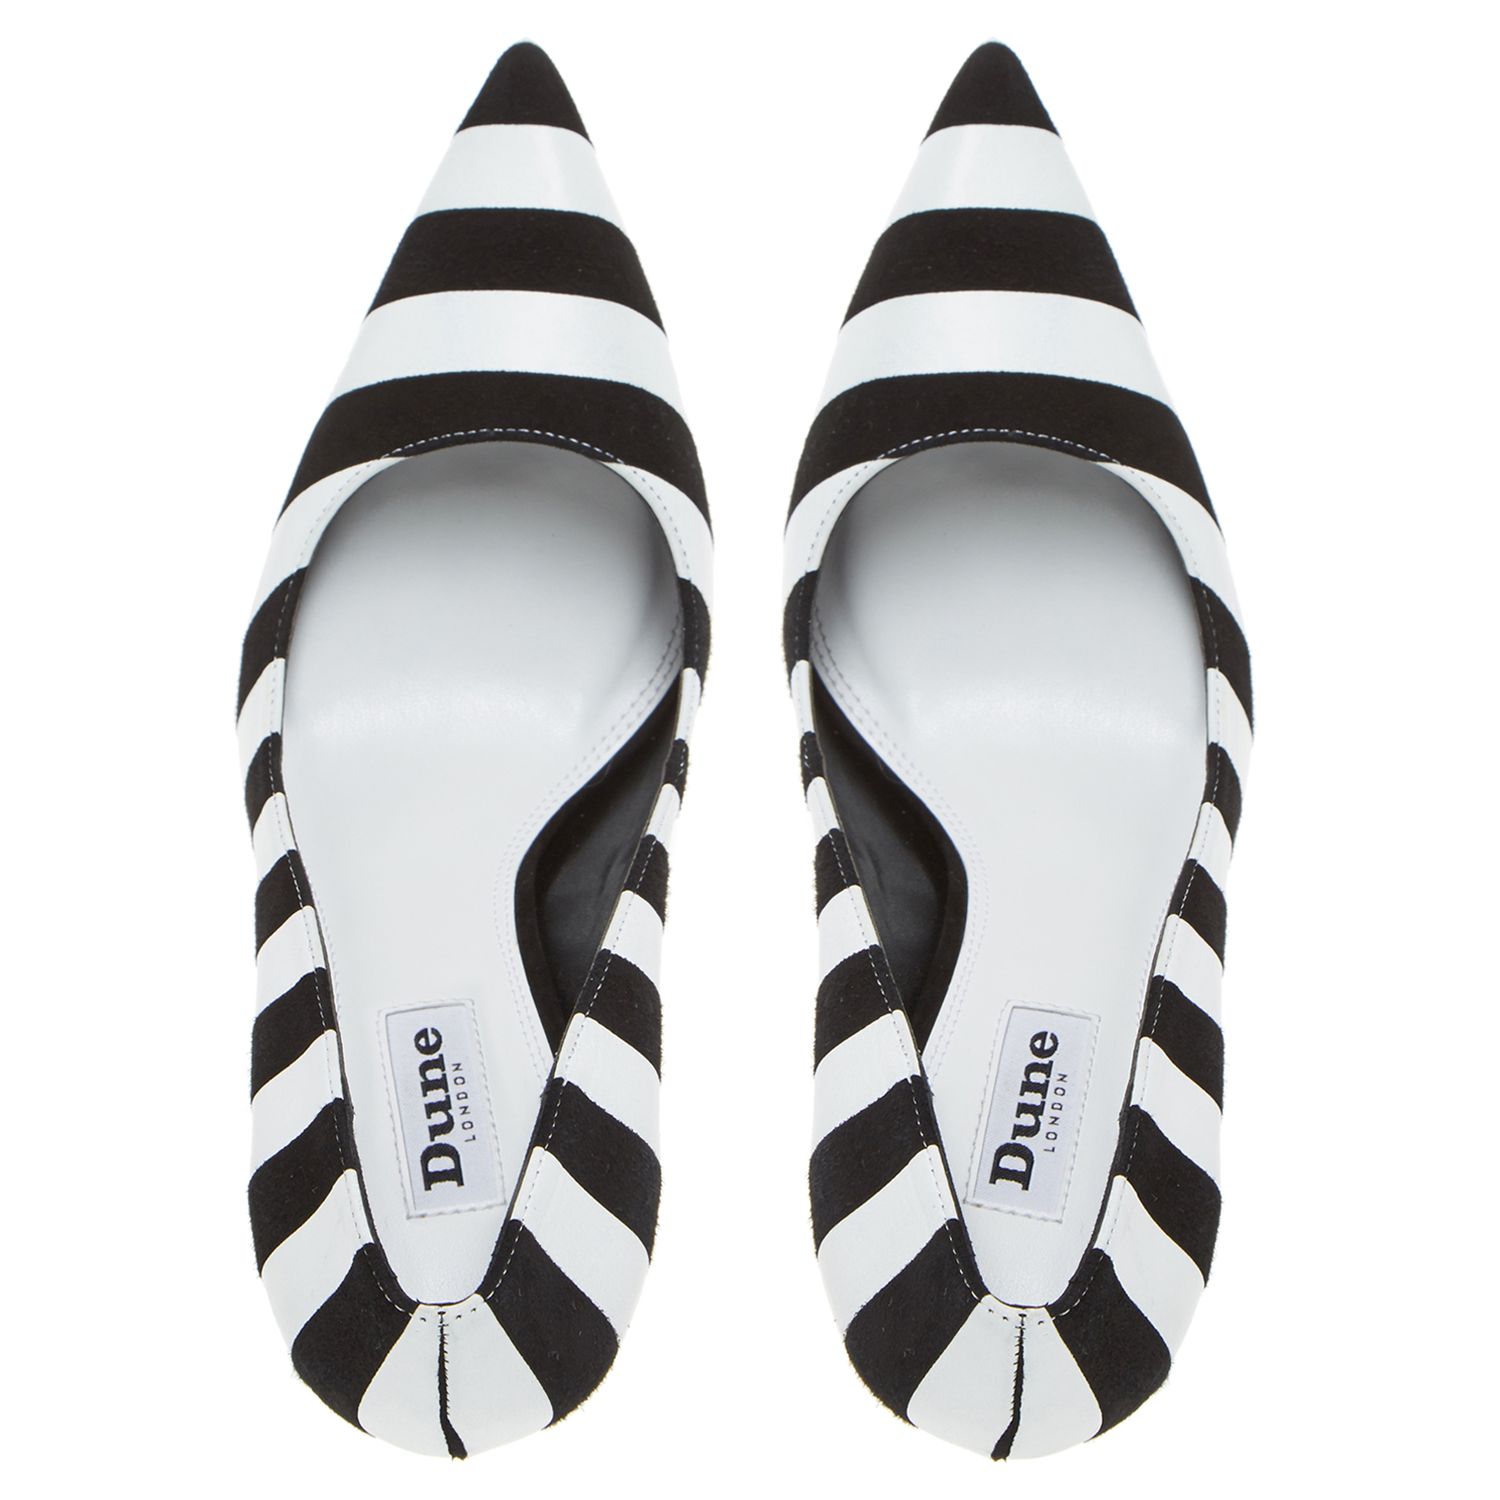 Dune Bellisi Pointed Toe Court Shoes, Black/White at John Lewis & Partners